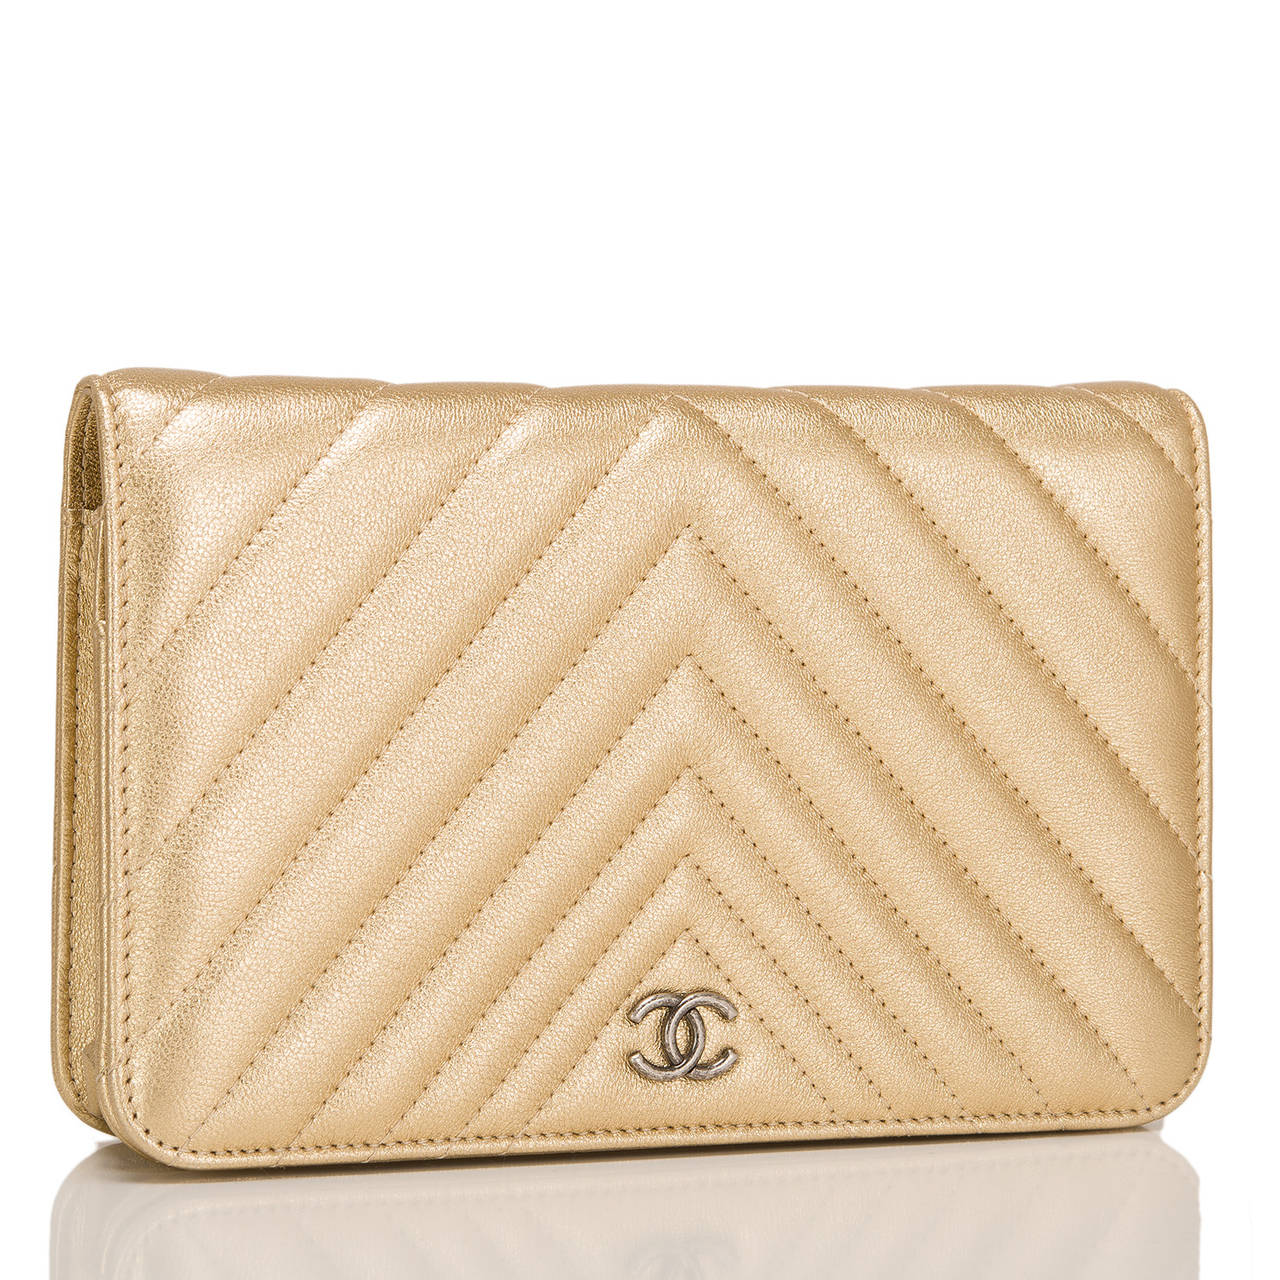 This Gold Quilted Chevron WOC in gold lambskin leather features signature Chanel Chevron quilting and ruthenium hardware,a front flap with CC charm and hidden snap closure, expandable sides and bottom, half moon rear pocket and interwoven ruthenium